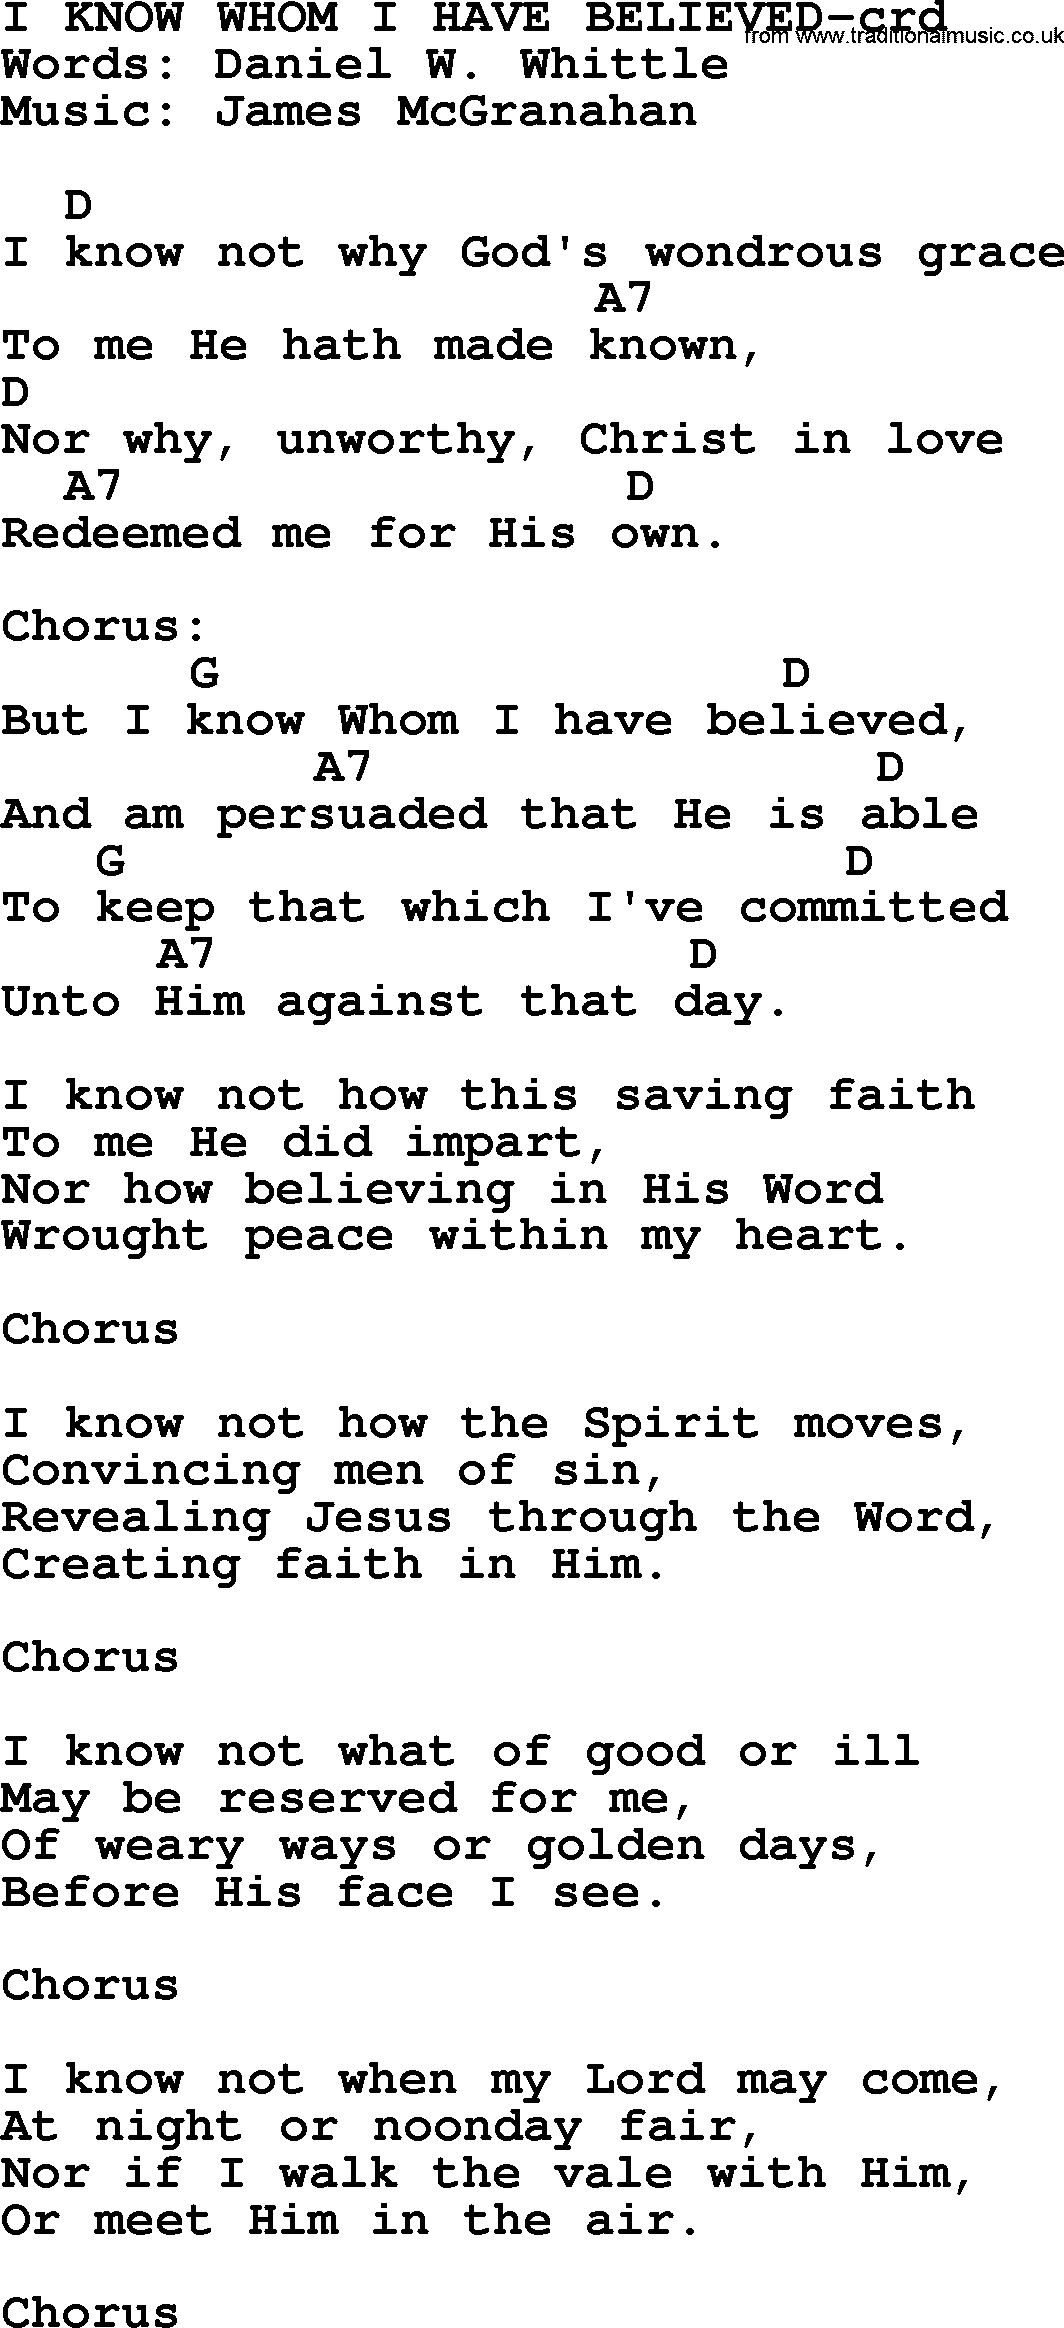 Top 500 Hymn: I Know Whom I Have Believed, lyrics and chords